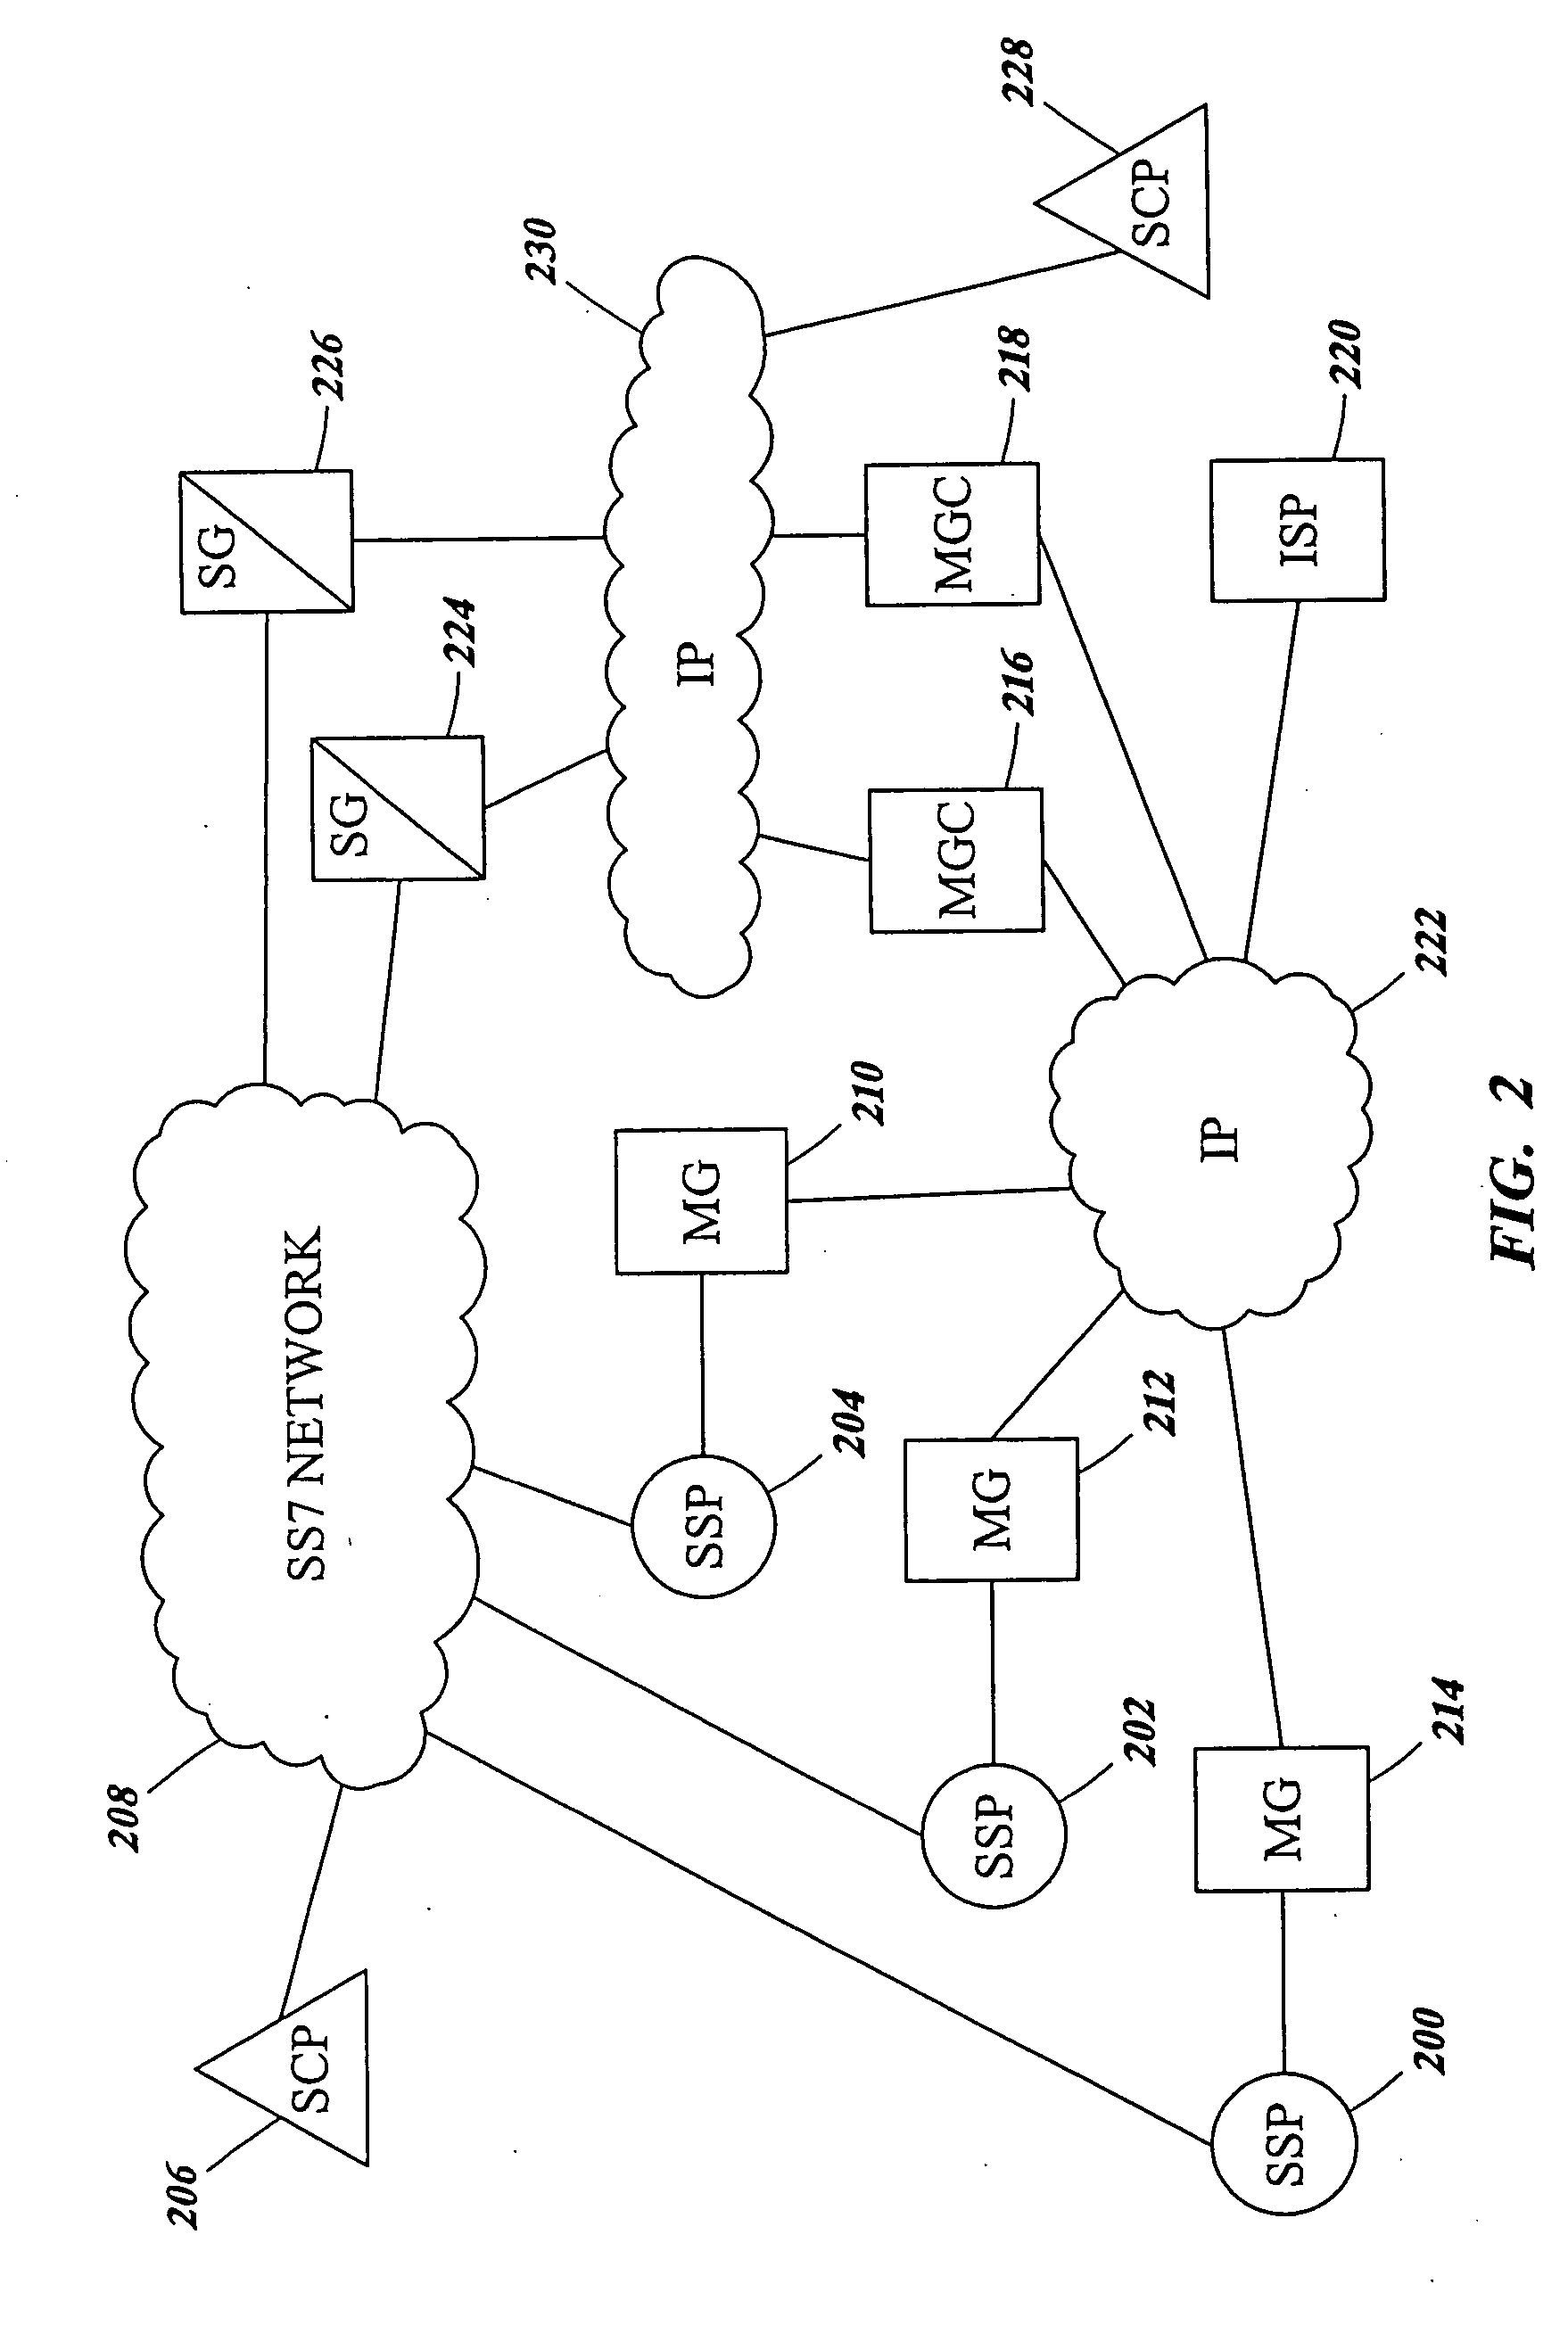 Methods and systems for communicating SS7 messages over packet-based network using transport adapter layer interface